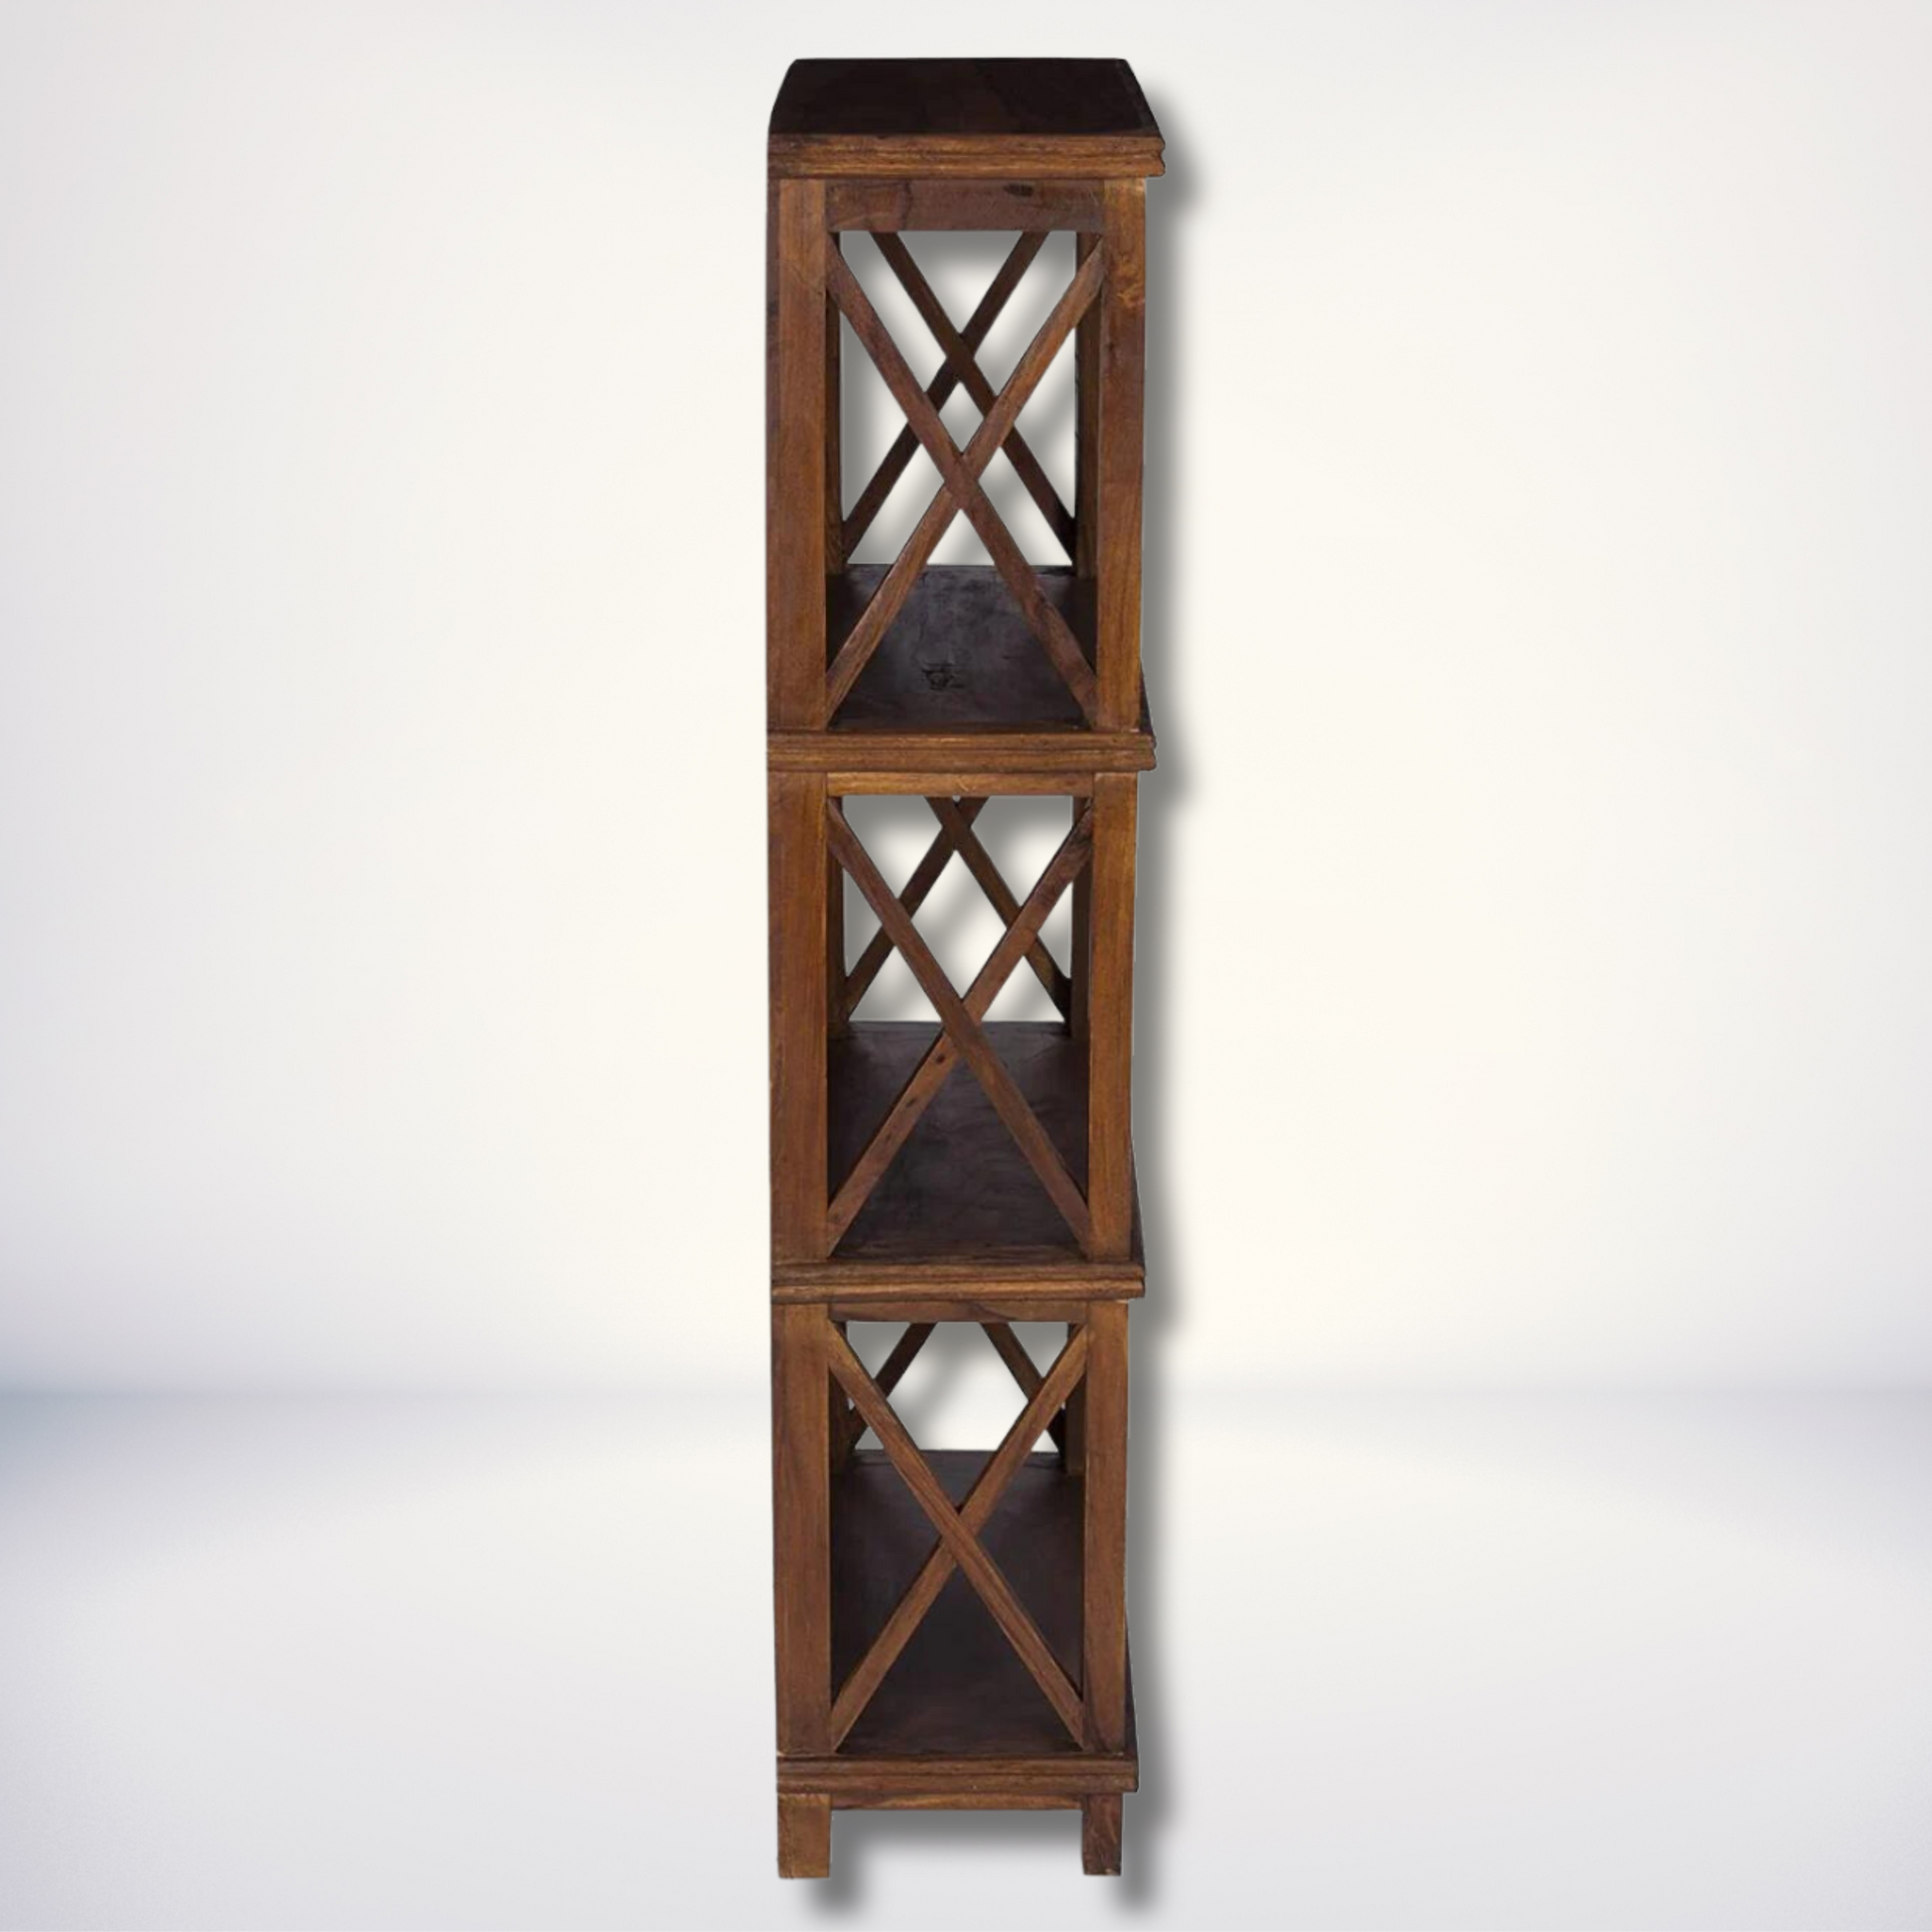 Handmade Wooden Bookcases with Cross Jali design - 3 Tier - Stylla London